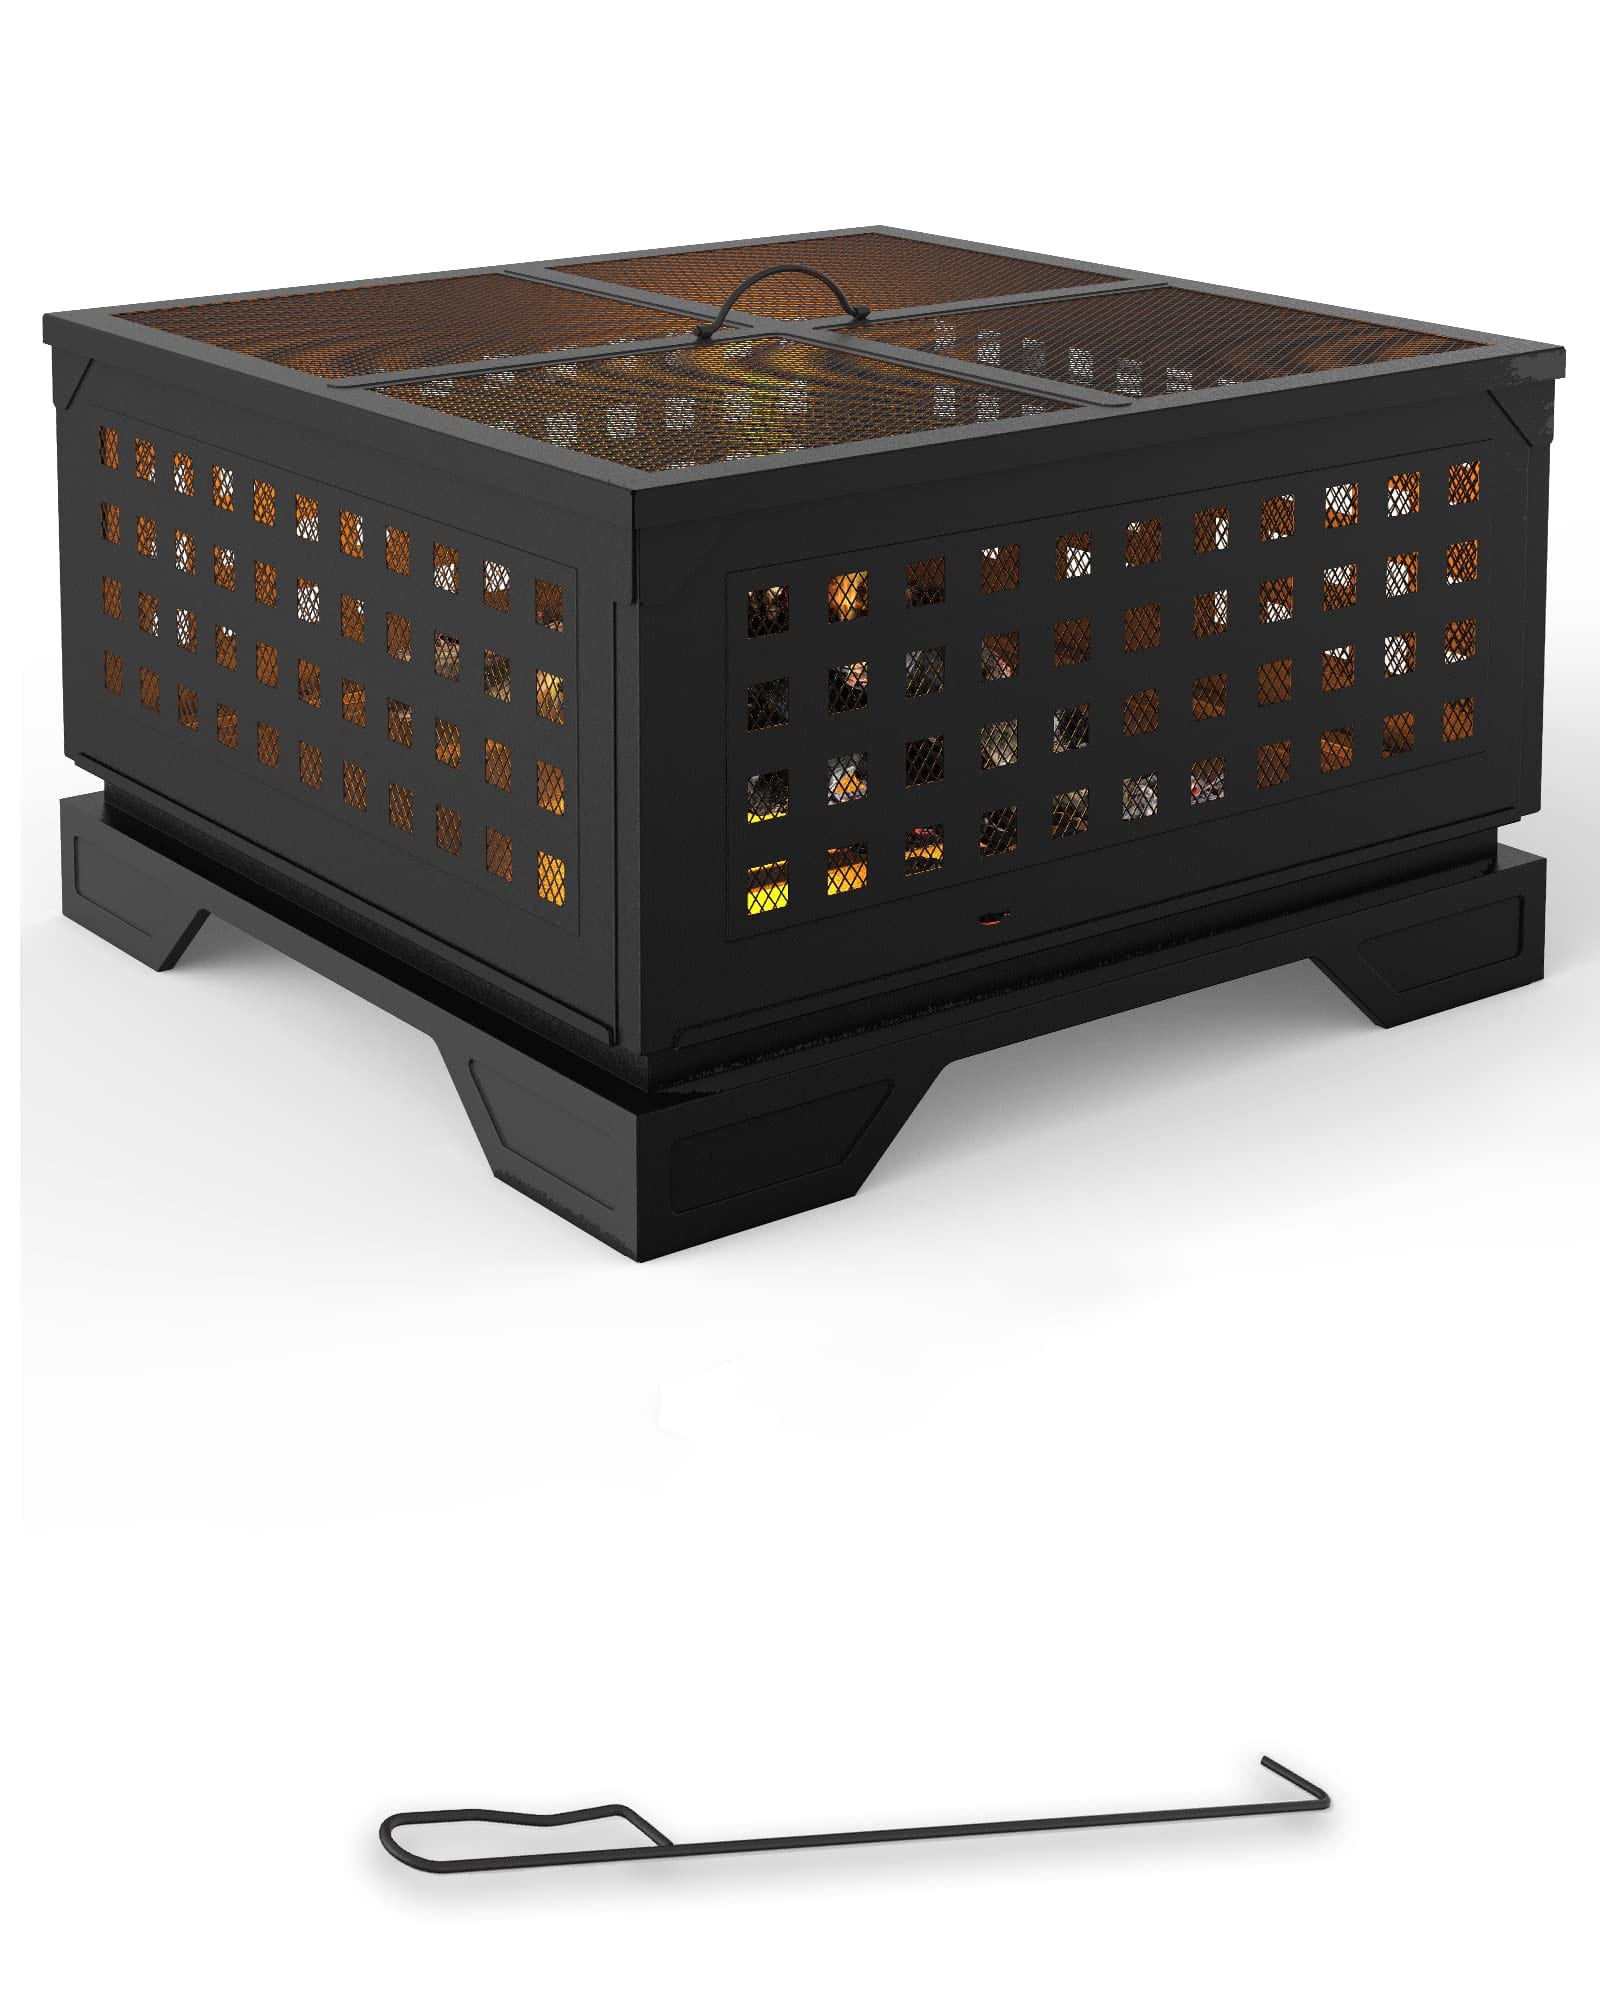 21.7 Inch Square Wood Burning Fire Pit with Spark Screen